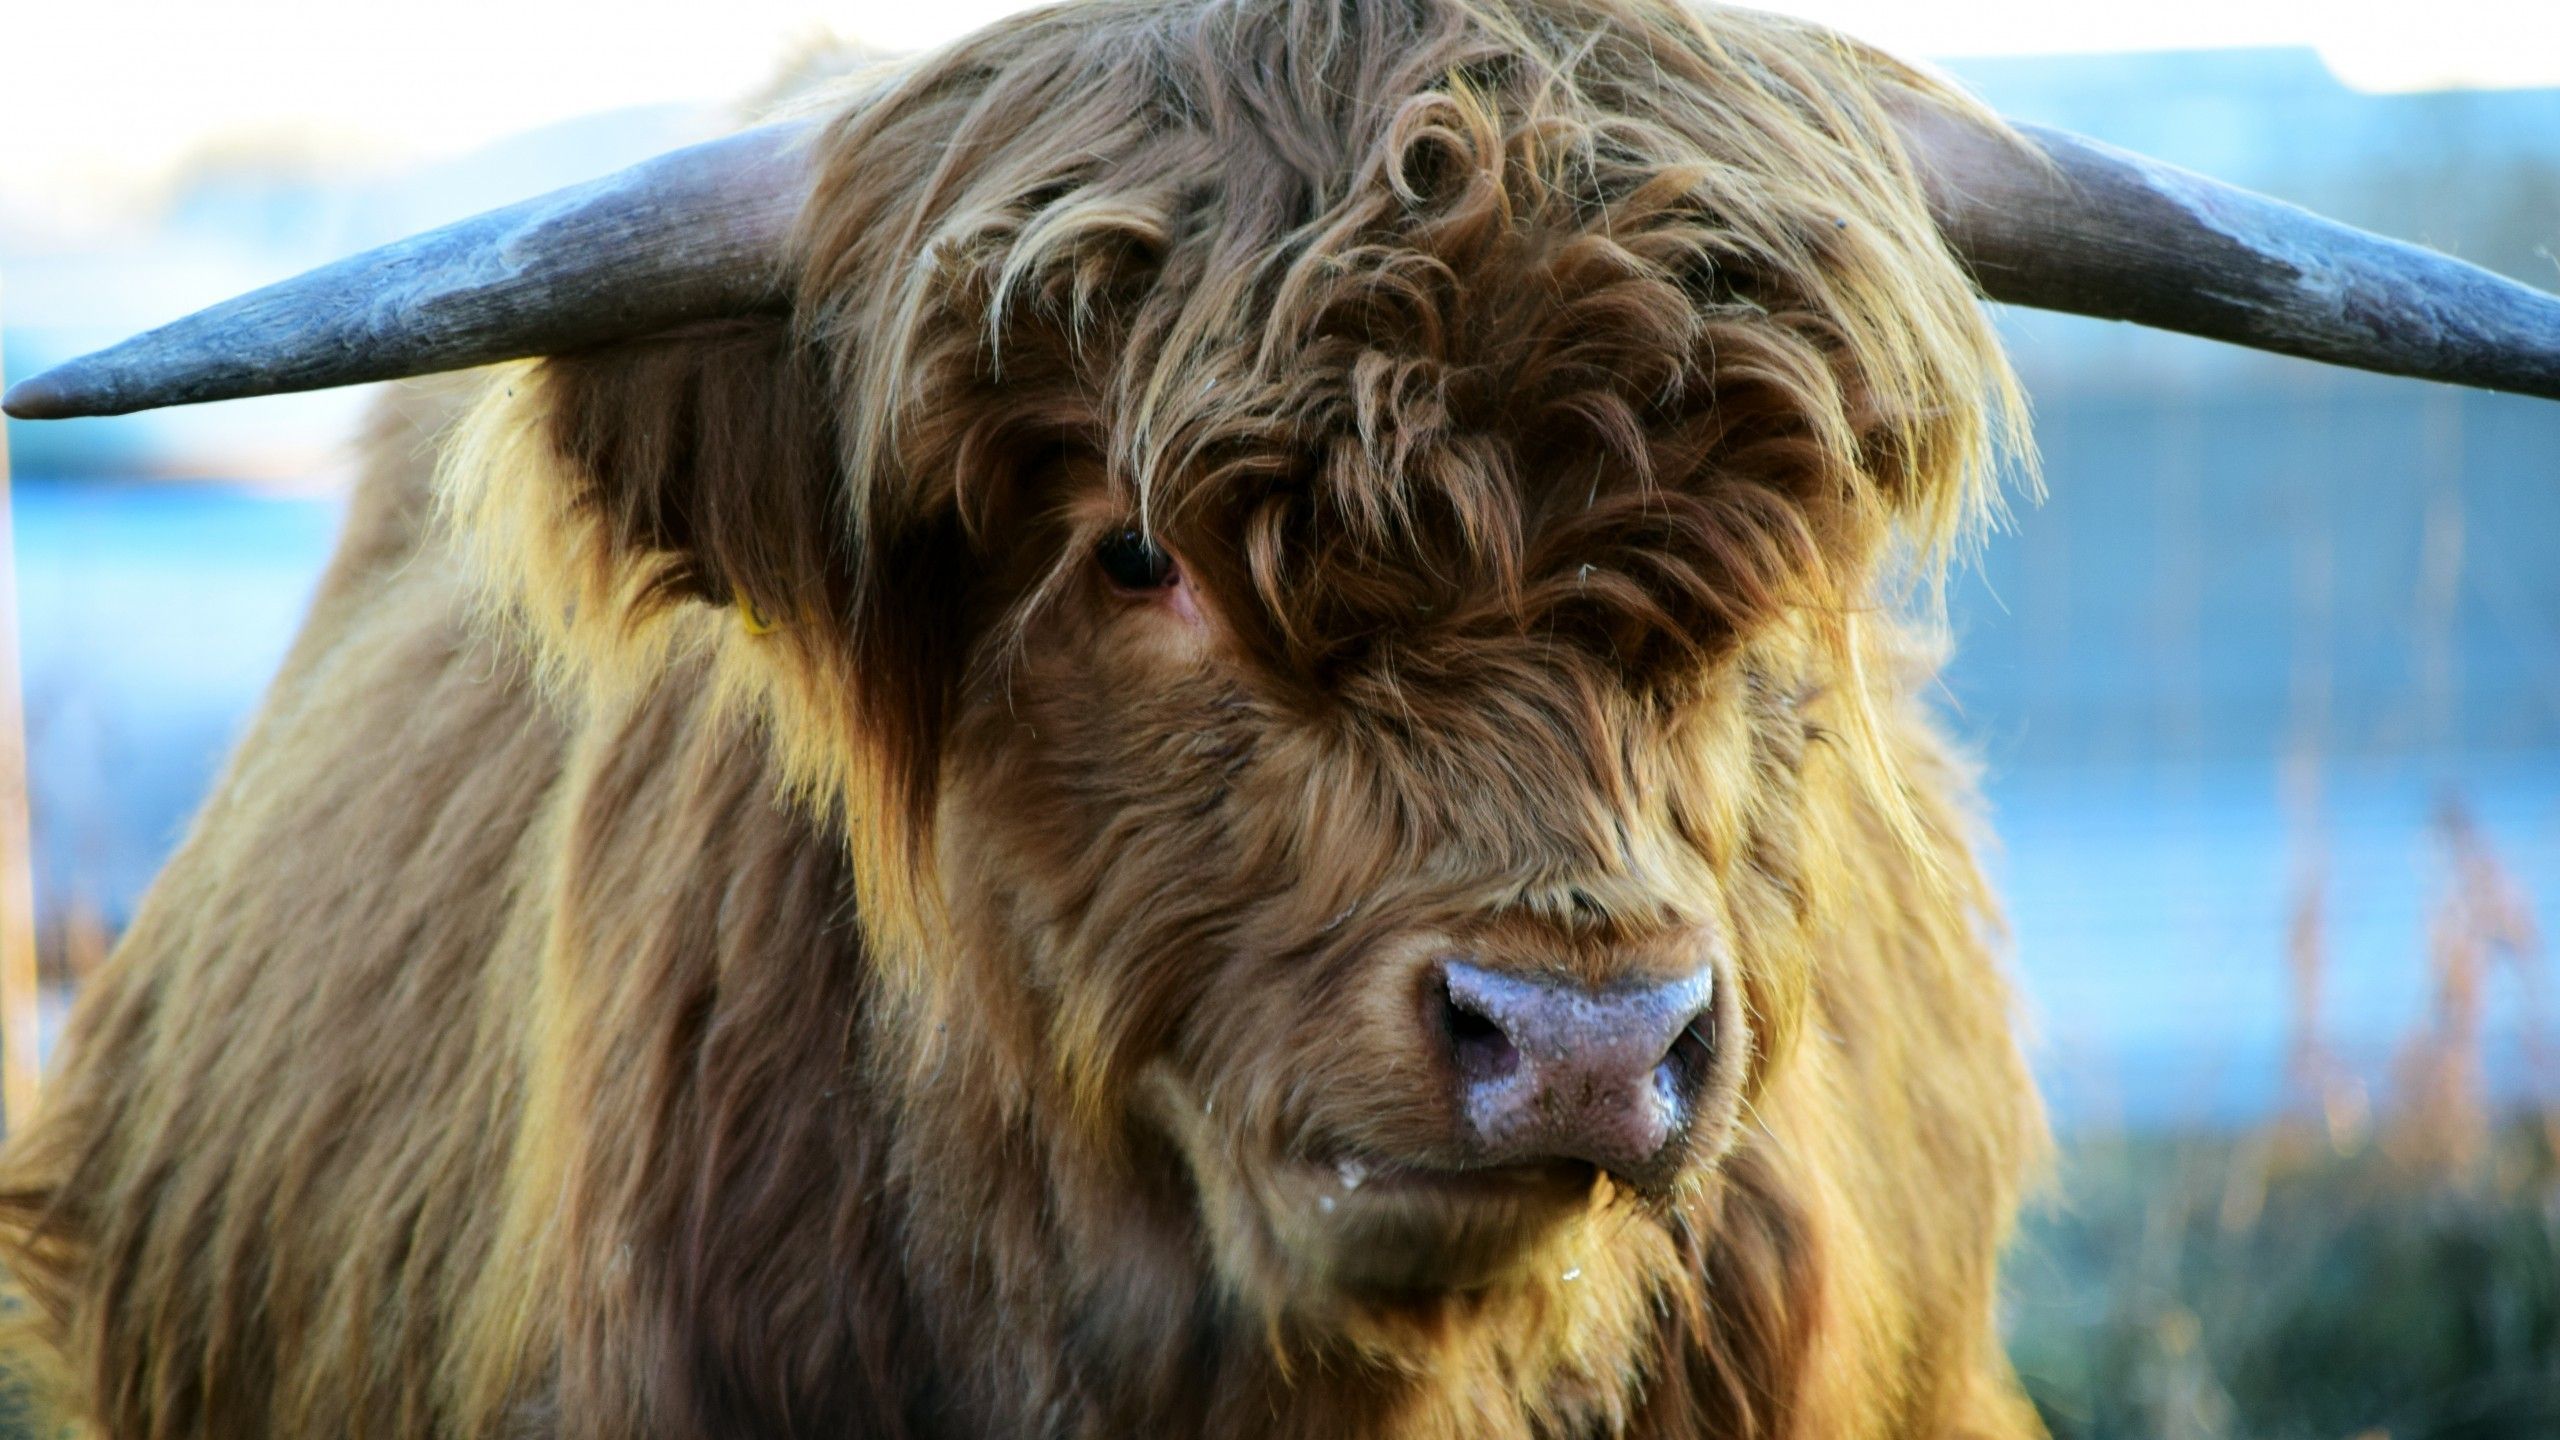 Download 2560x1440 Highland Cattle, Fluffy, Horns, Close Up Wallpaper For IMac 27 Inch